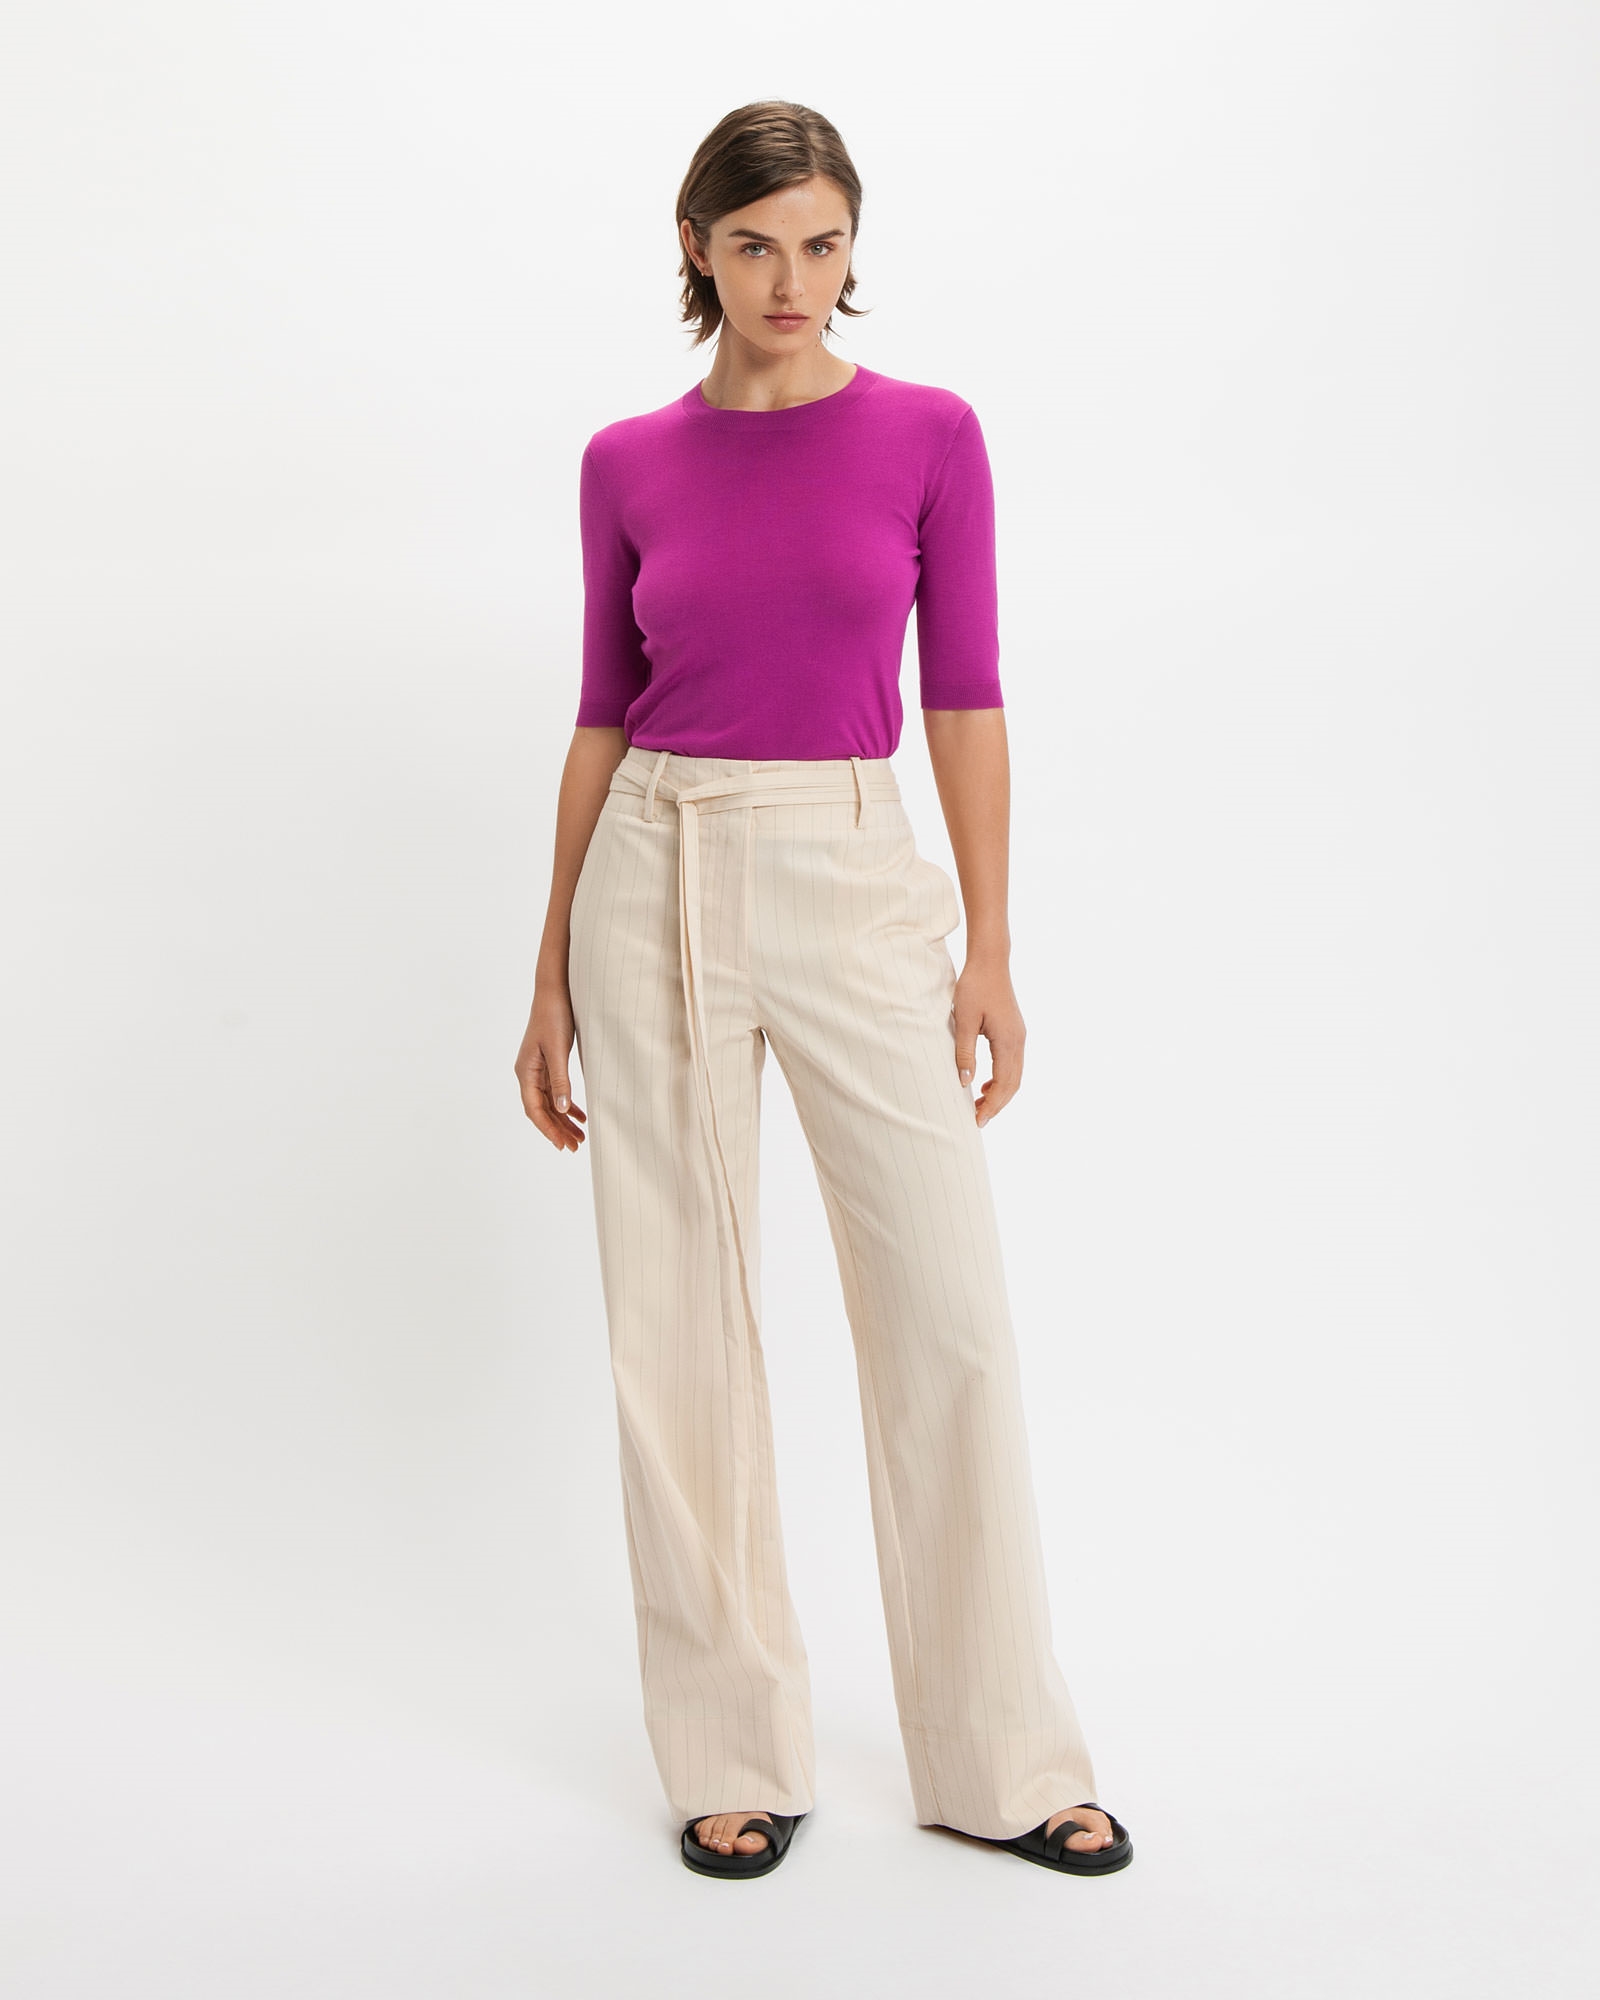 Tops and Shirts | Elbow Sleeve Round Neck Knit | 550 Fuschia